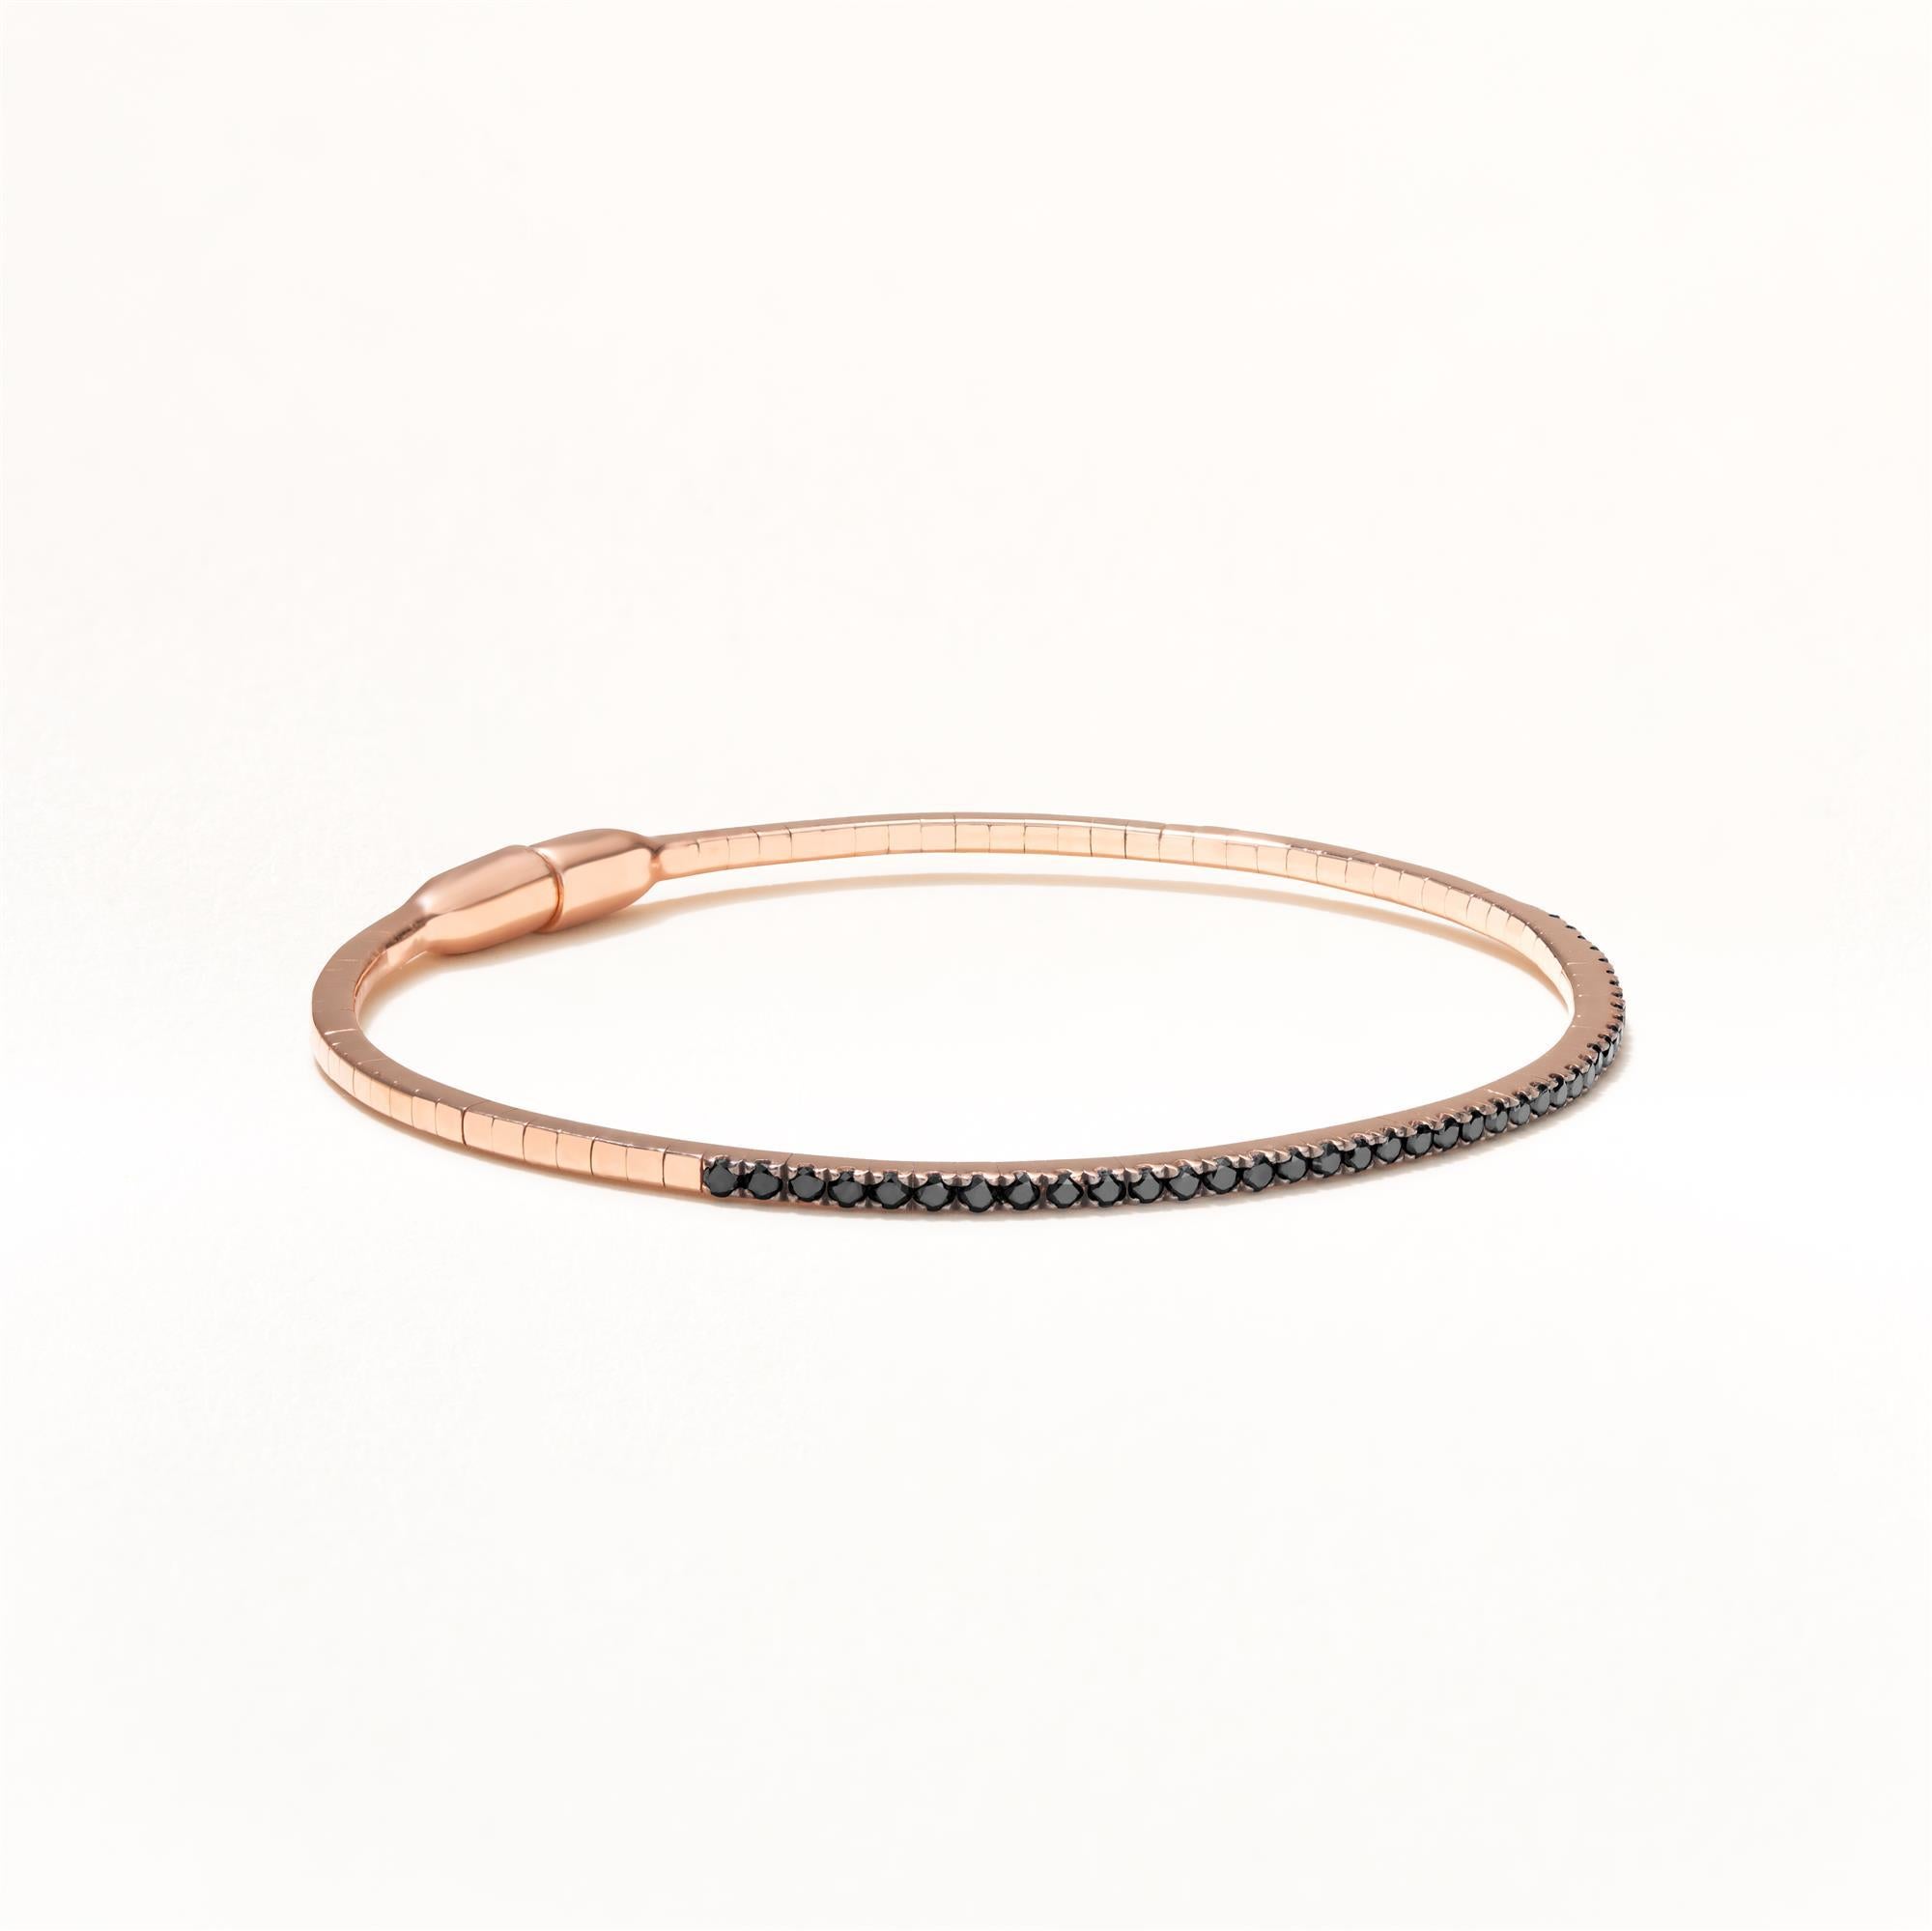 41 Round full-cut Black Diamonds are set in a micro pave on this Luxle 18K Rose Gold bangle with magnetic clasp. The diamonds are black in color, weighing 0.57 Cts. Adorn this beautiful bangle that will make heads turn wherever you go. You can